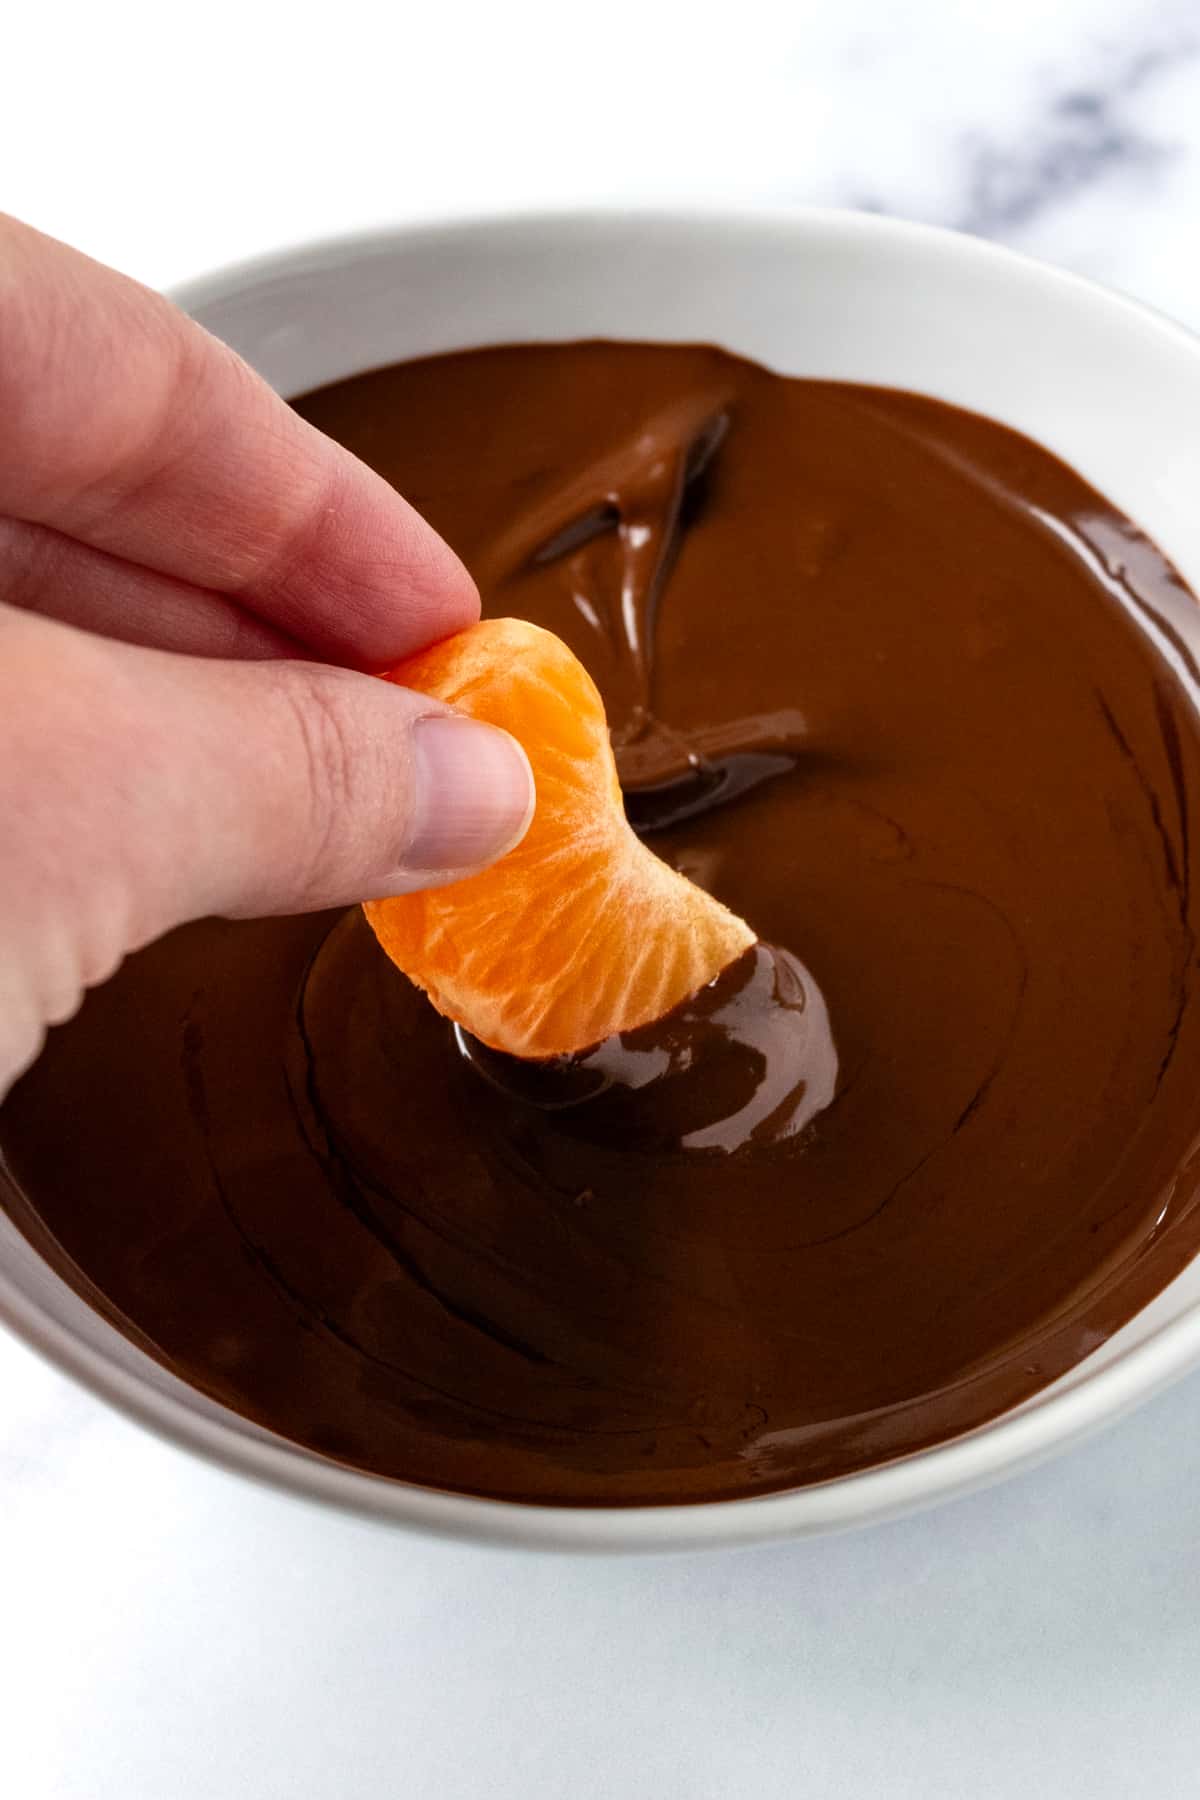 Hand dipping a mandarin orange in melted chocolate.